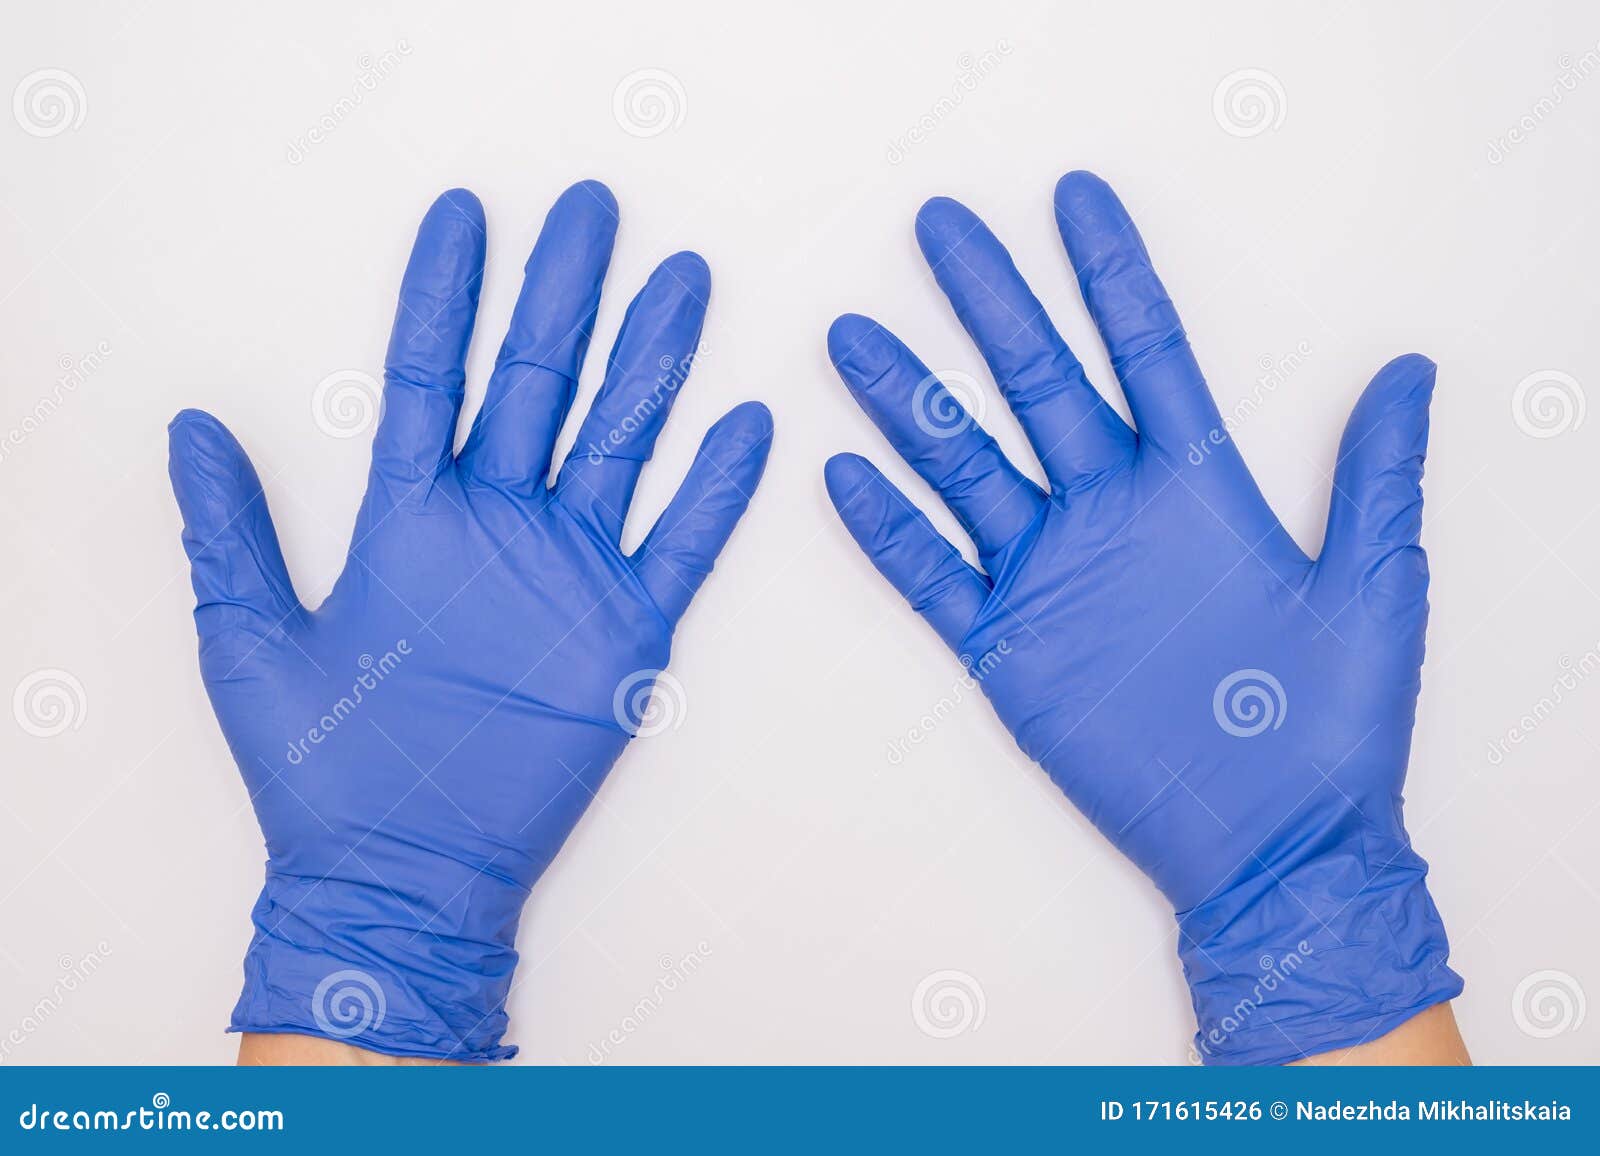 human hands wearing blue surgical latex nitrile gloves for doctor and nurse protection during patient examination on white